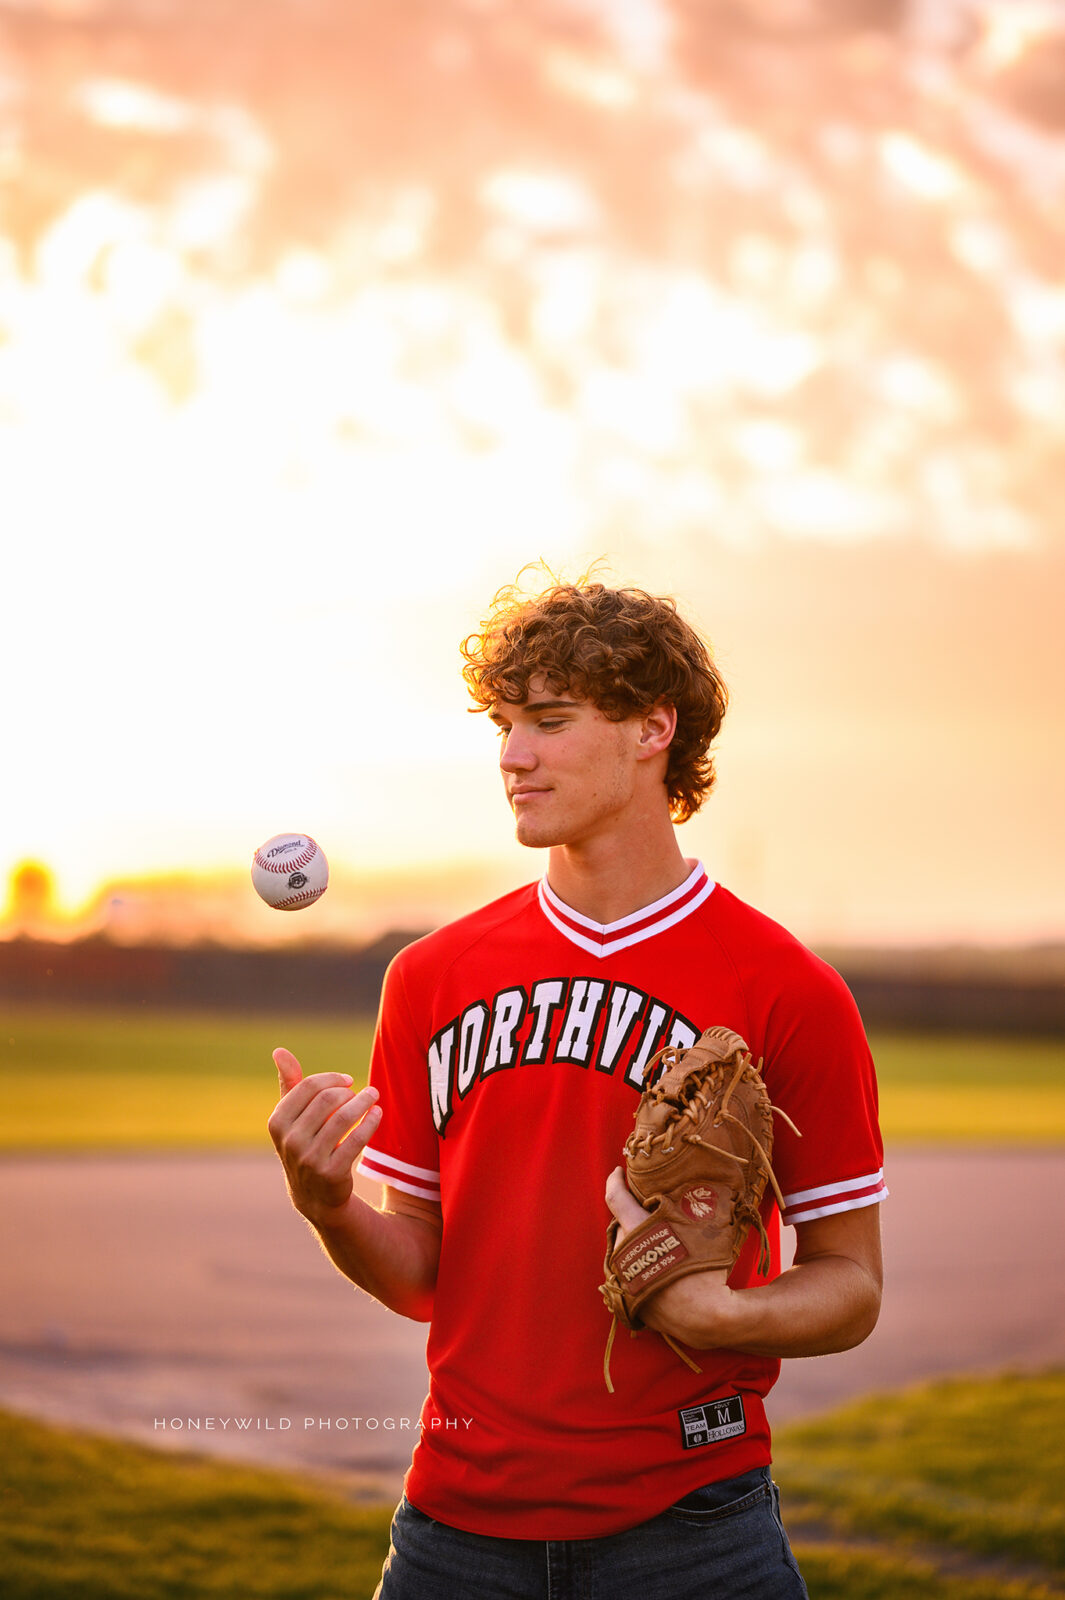 grand rapids senior boy throwing a baseball up in the air